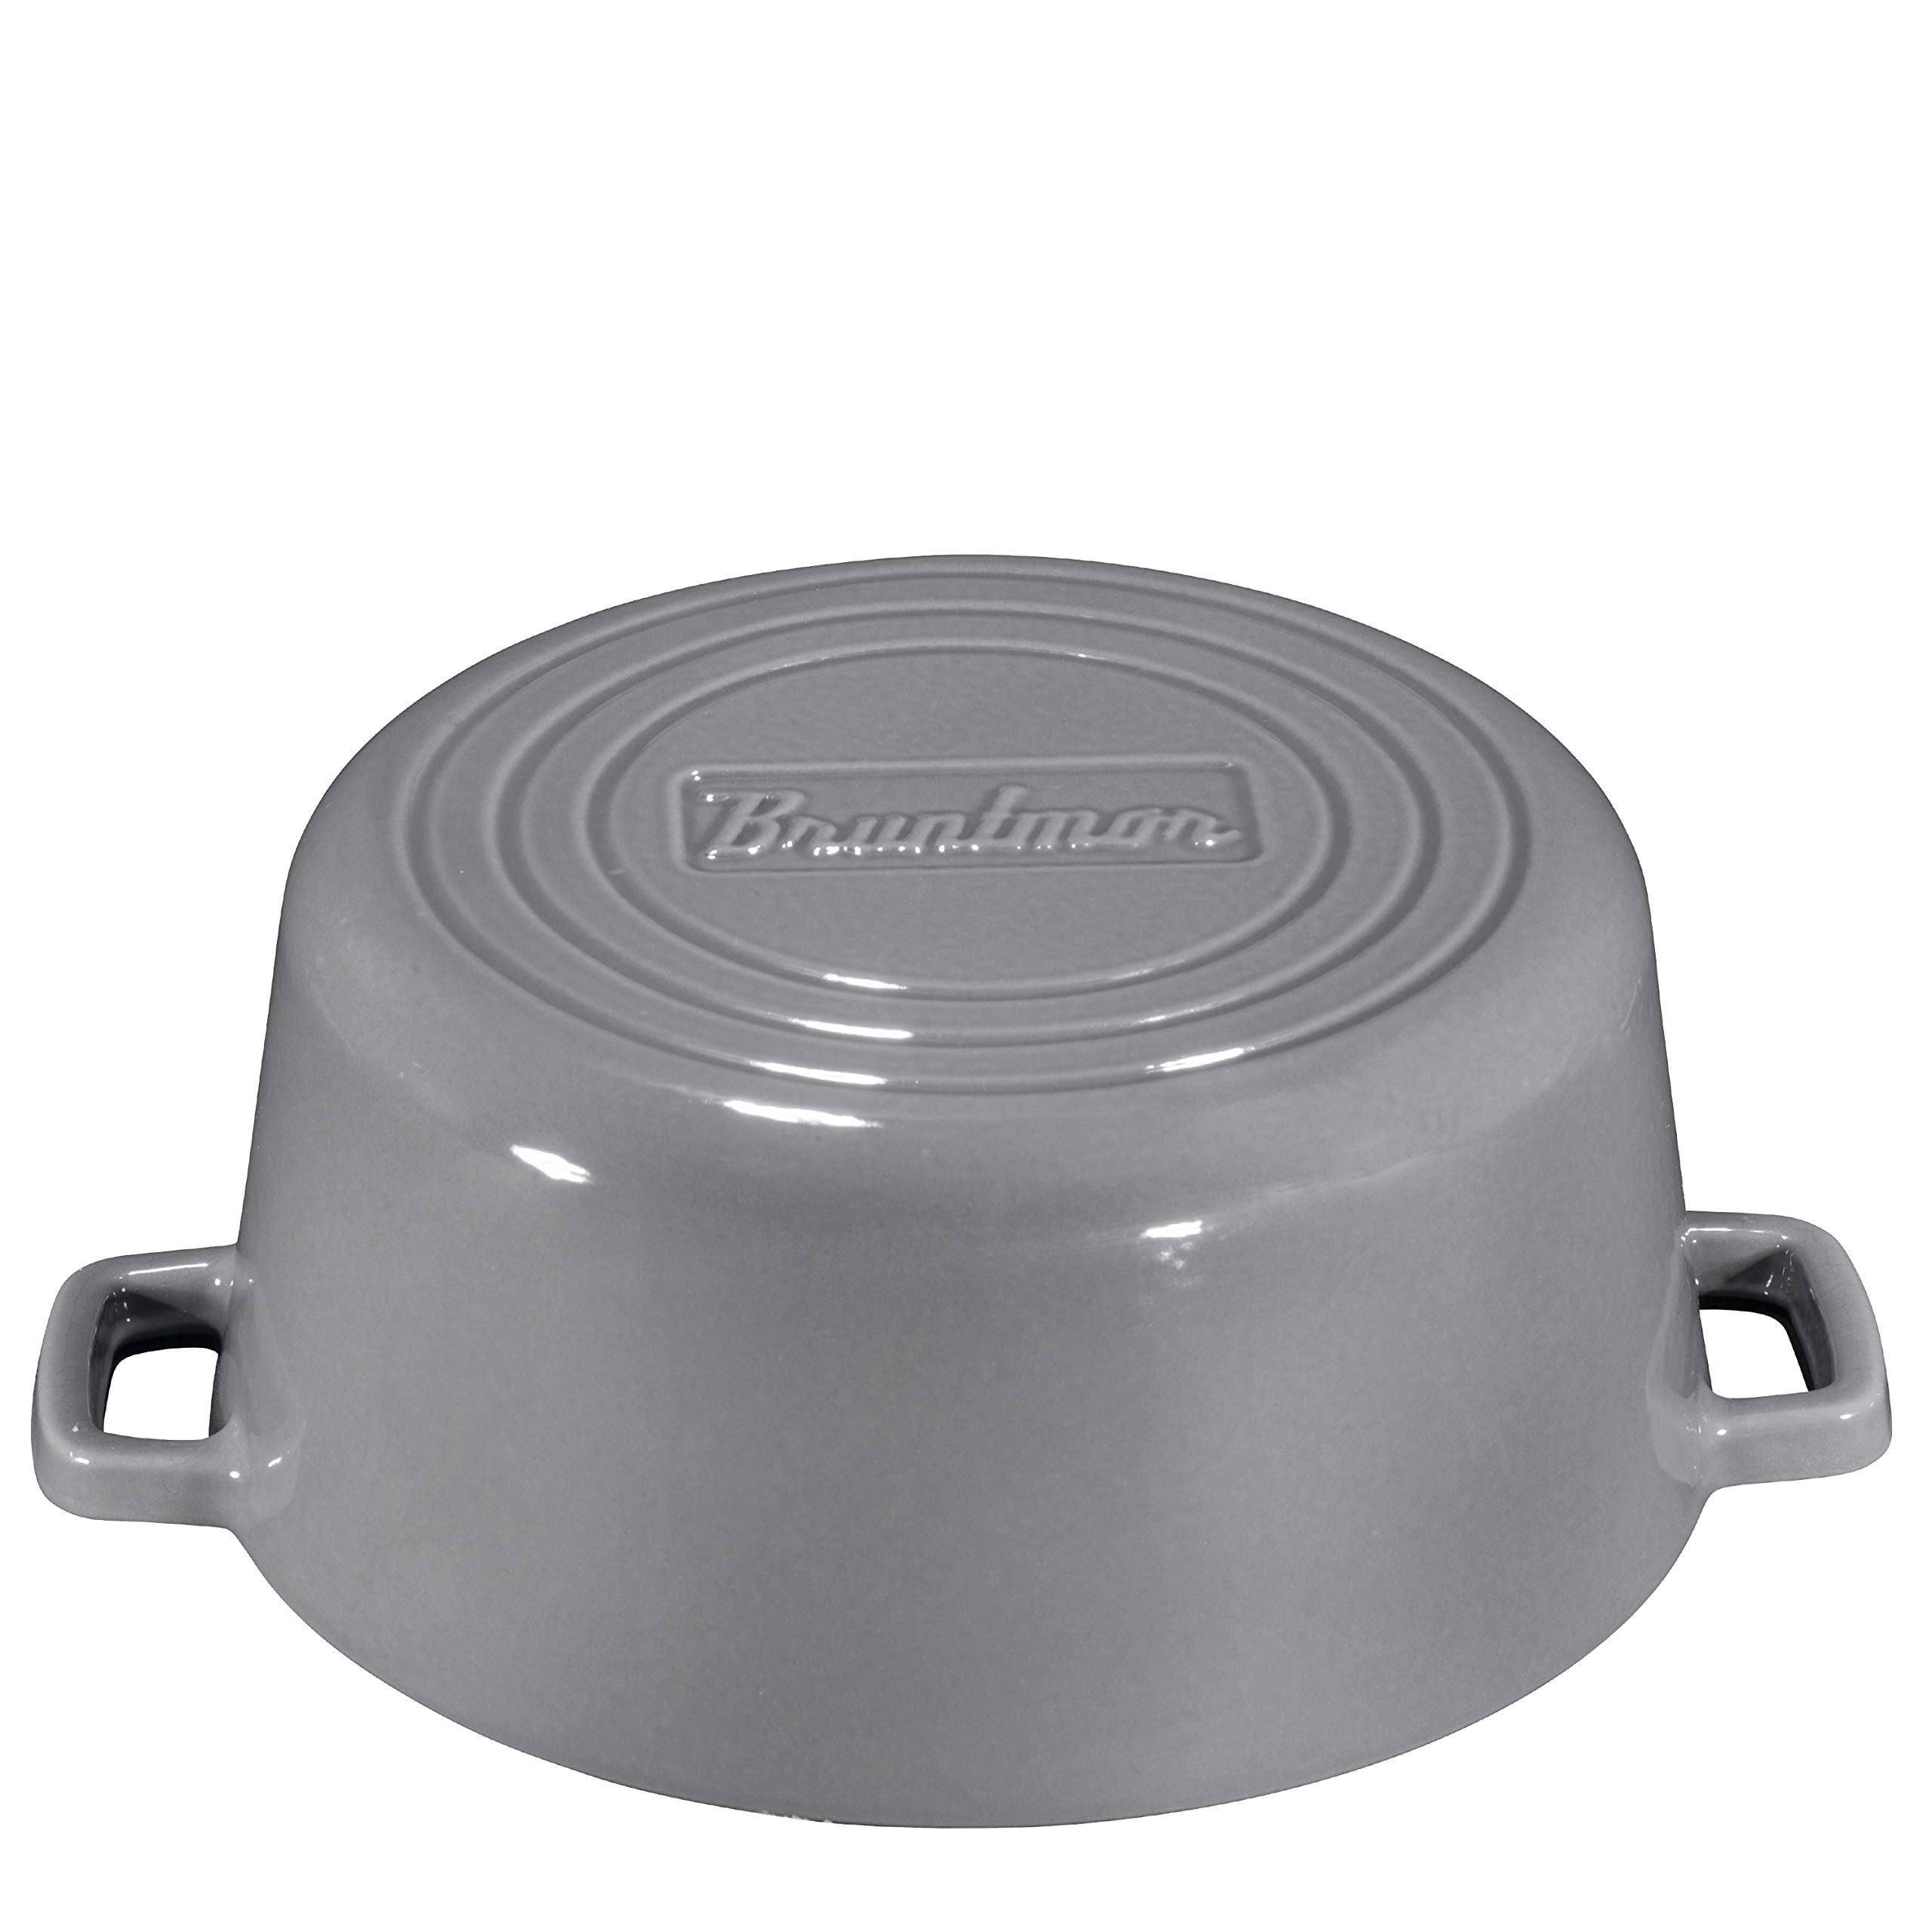 Bruntmor 5 Qt Silver 2-in-1 Enameled Cast Iron Induction Cookware